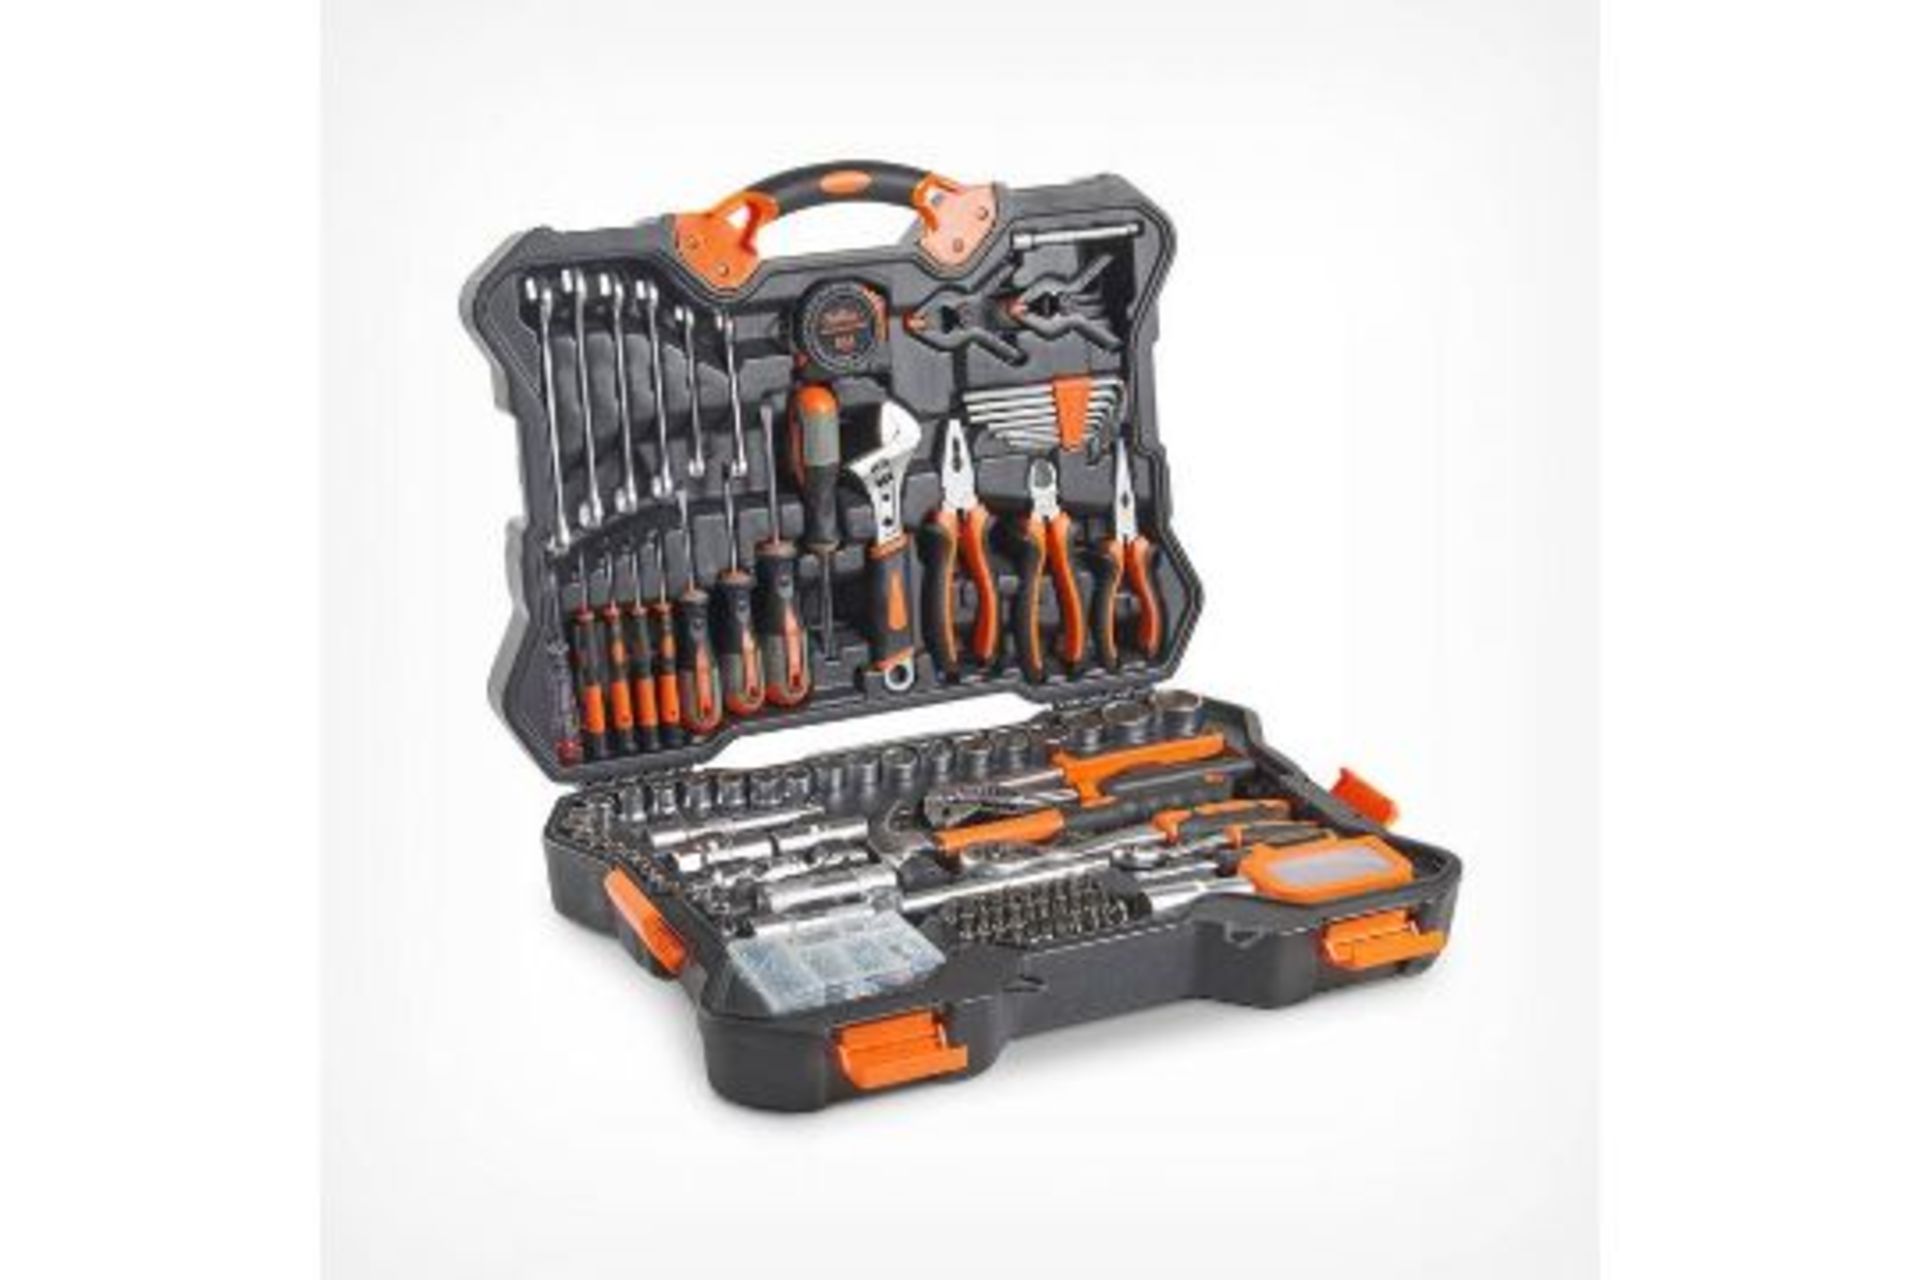 New Boxed - 256pc Premium Tool & Socket Set. (REF180-ROW6) A superior and comprehensive set for a